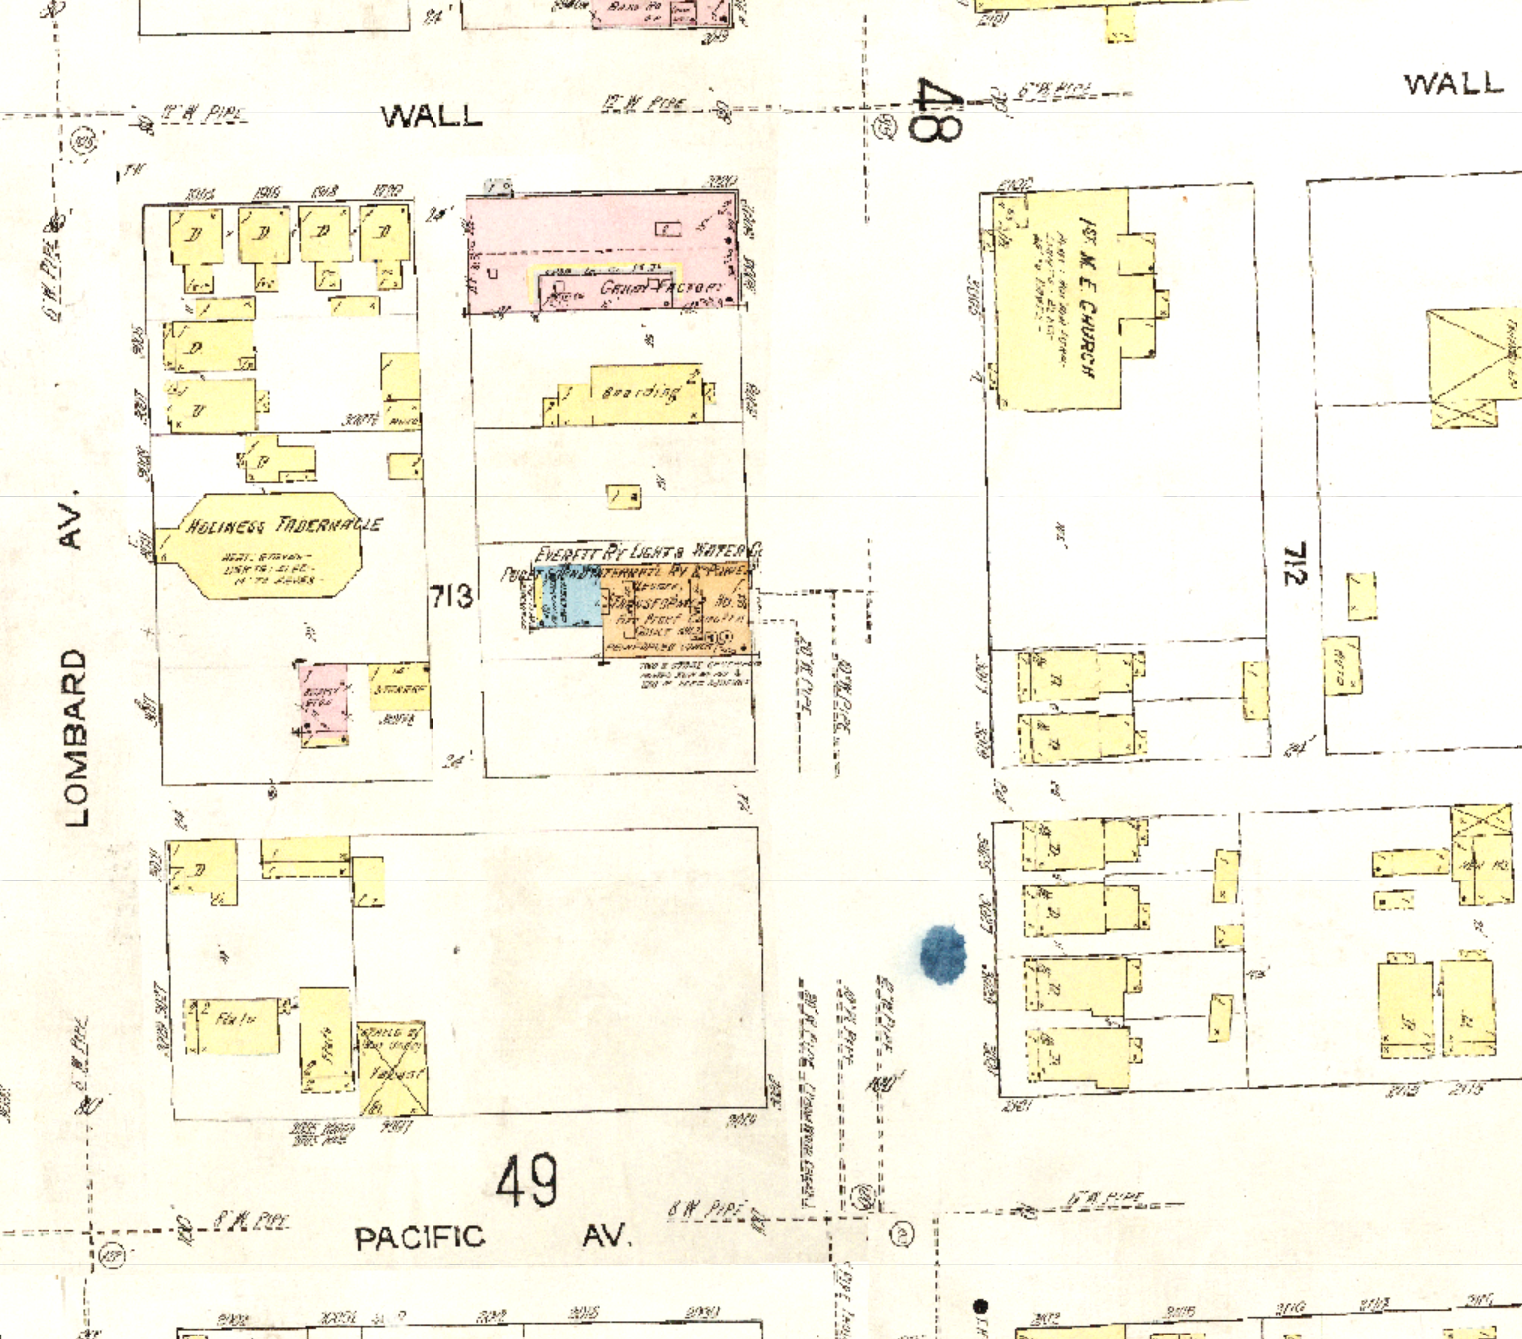  The 1914 Sanborn map shows the building of the Everett Railway, Light, and Water Company on Broadway between Wall St and Pacific Ave. 